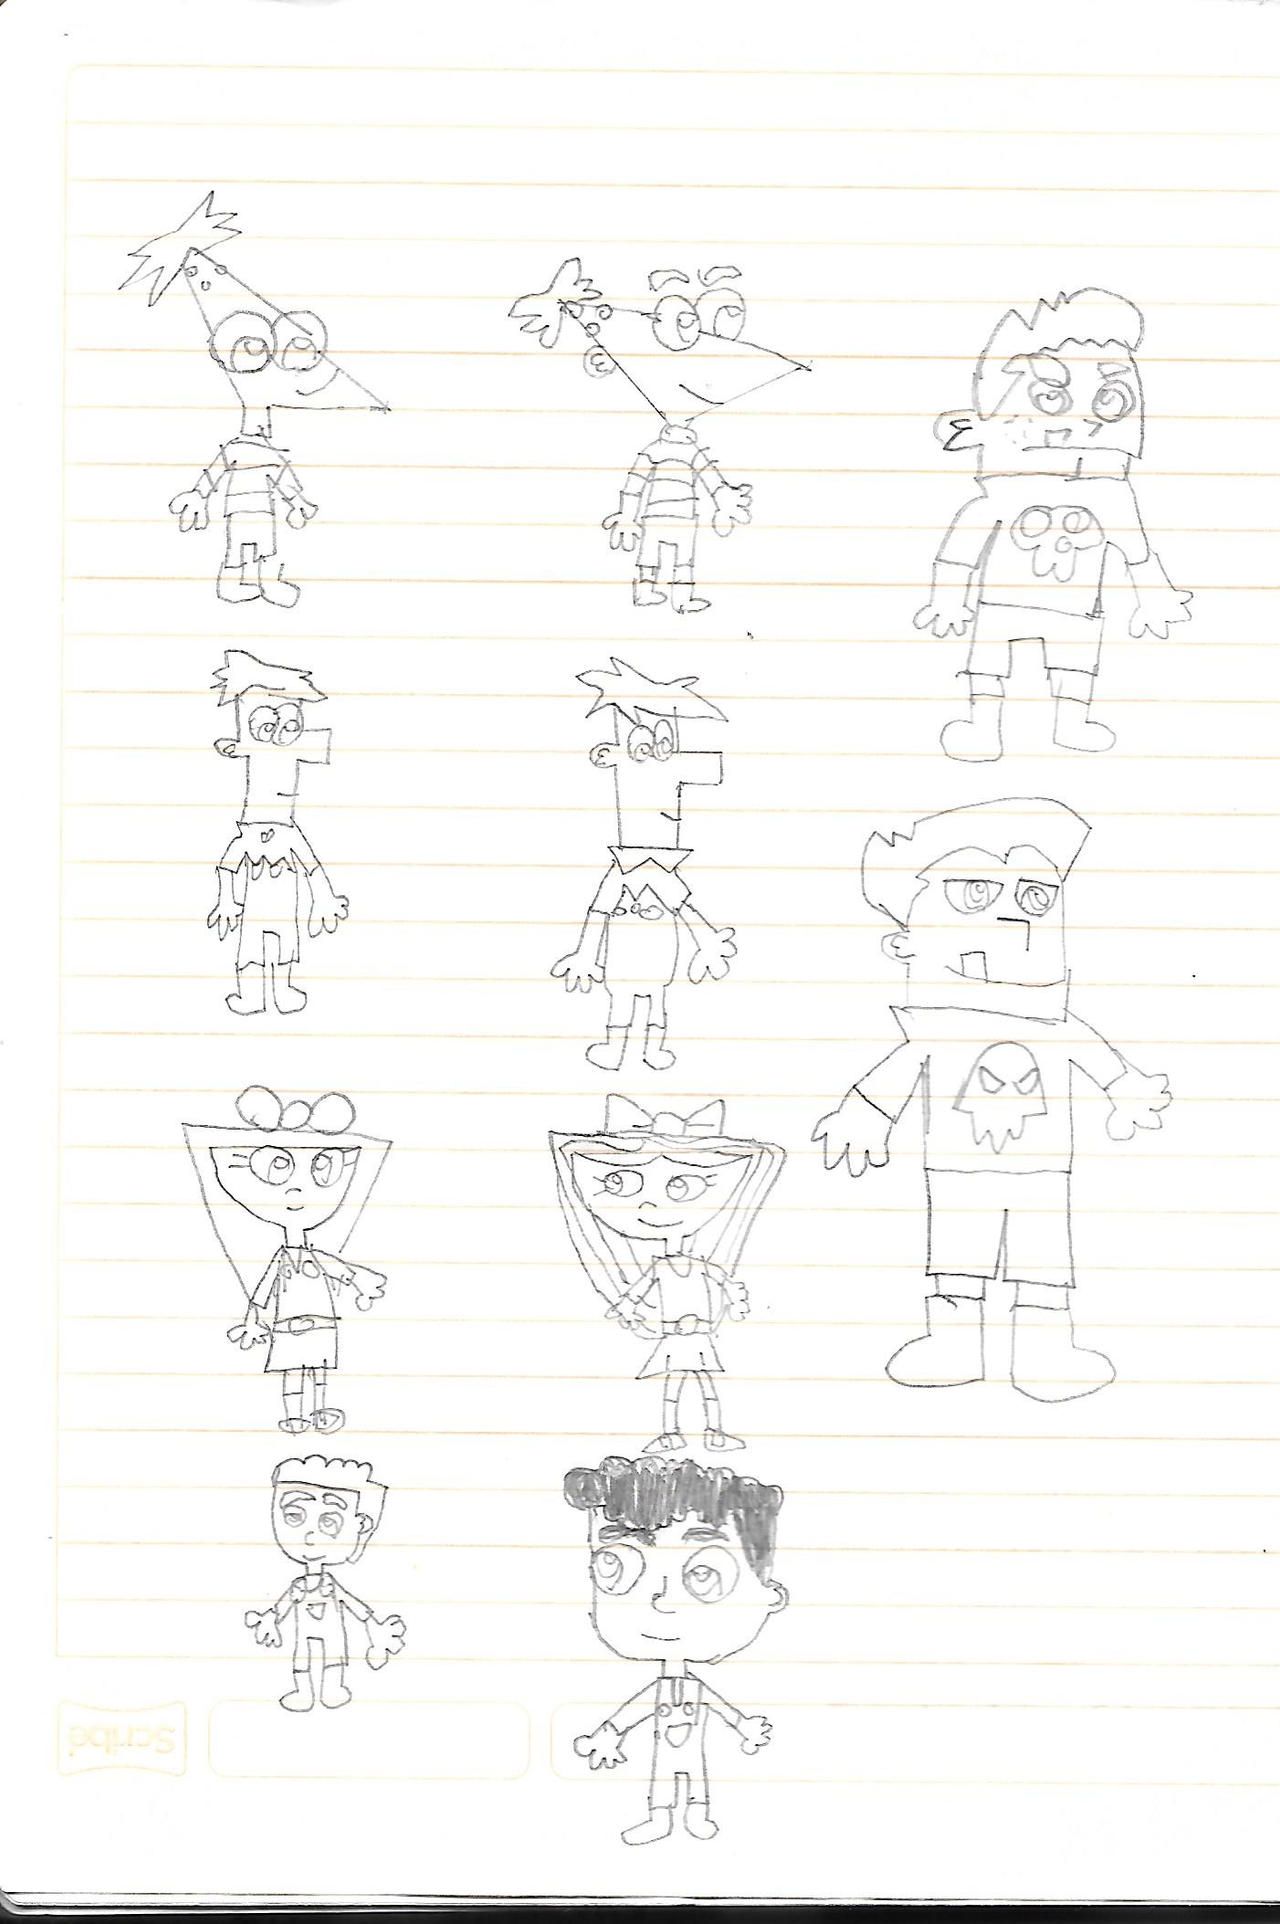 Phineas And Ferb Characters Improvement Desings by CharlieMozart97